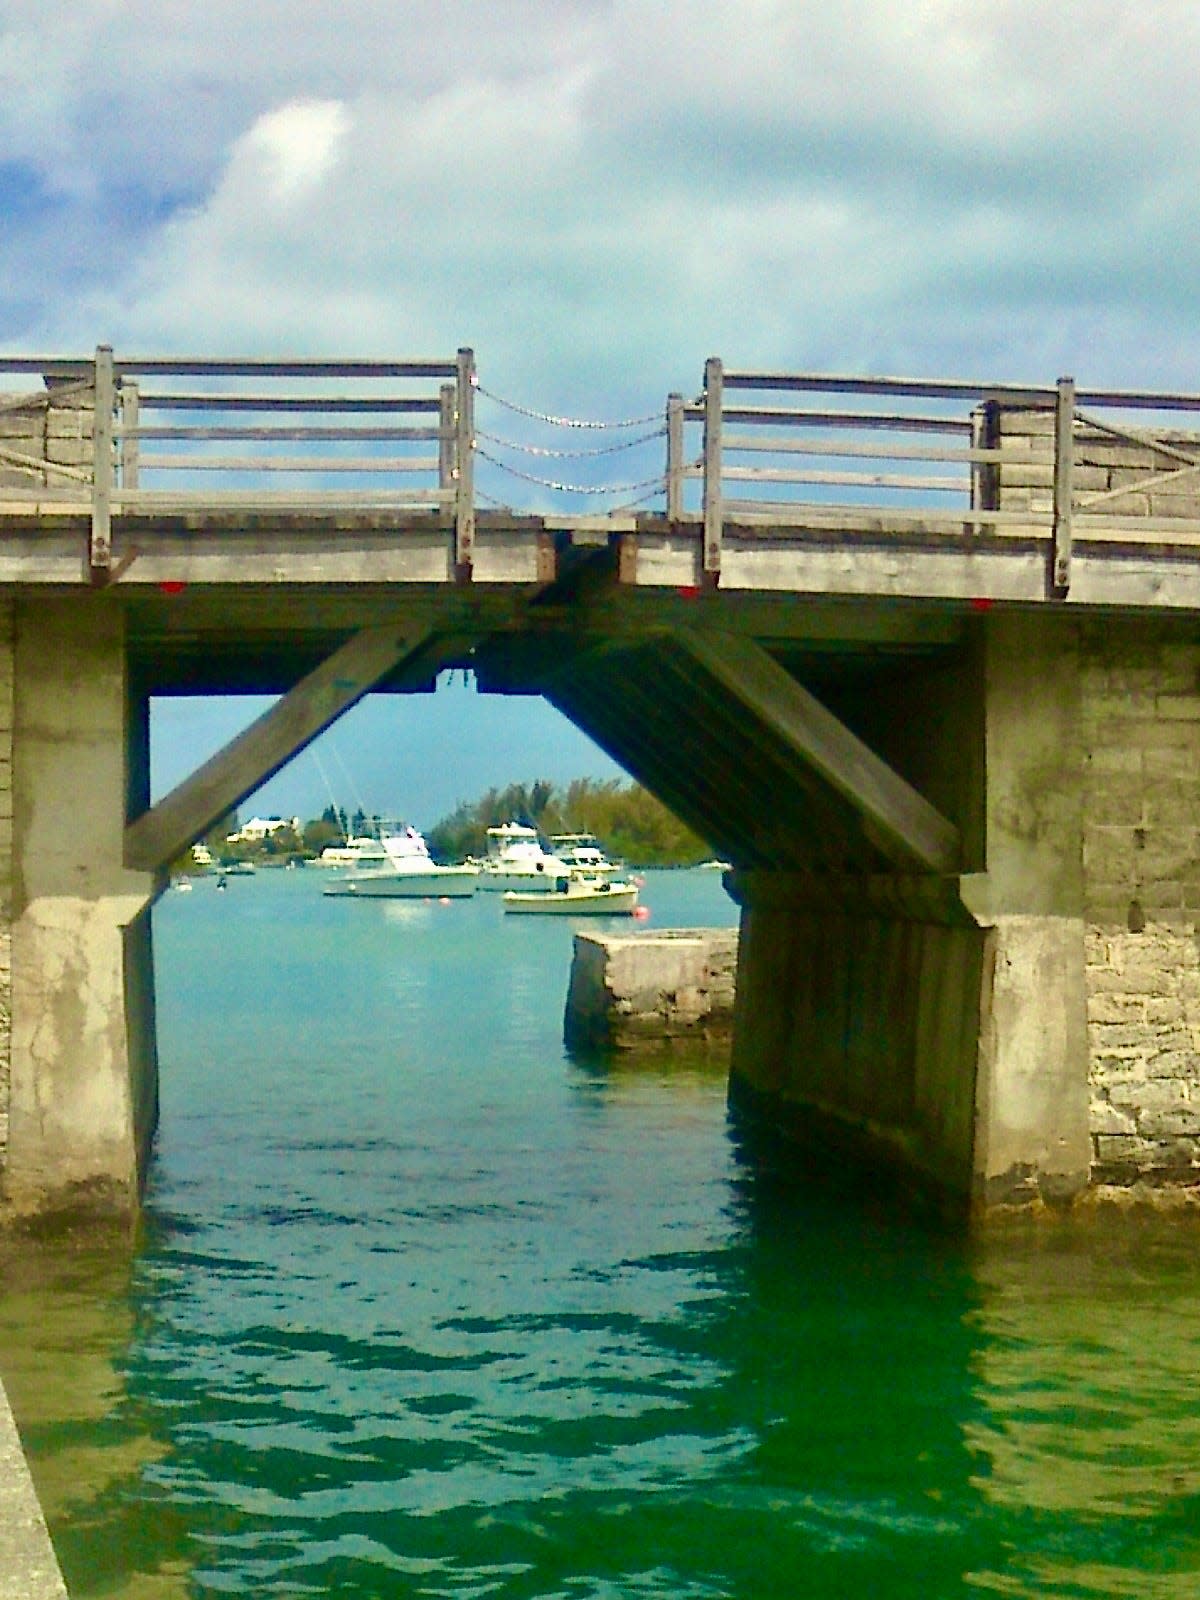 Bermuda boasts, if that’s the right word, the smallest drawbridge in the world.